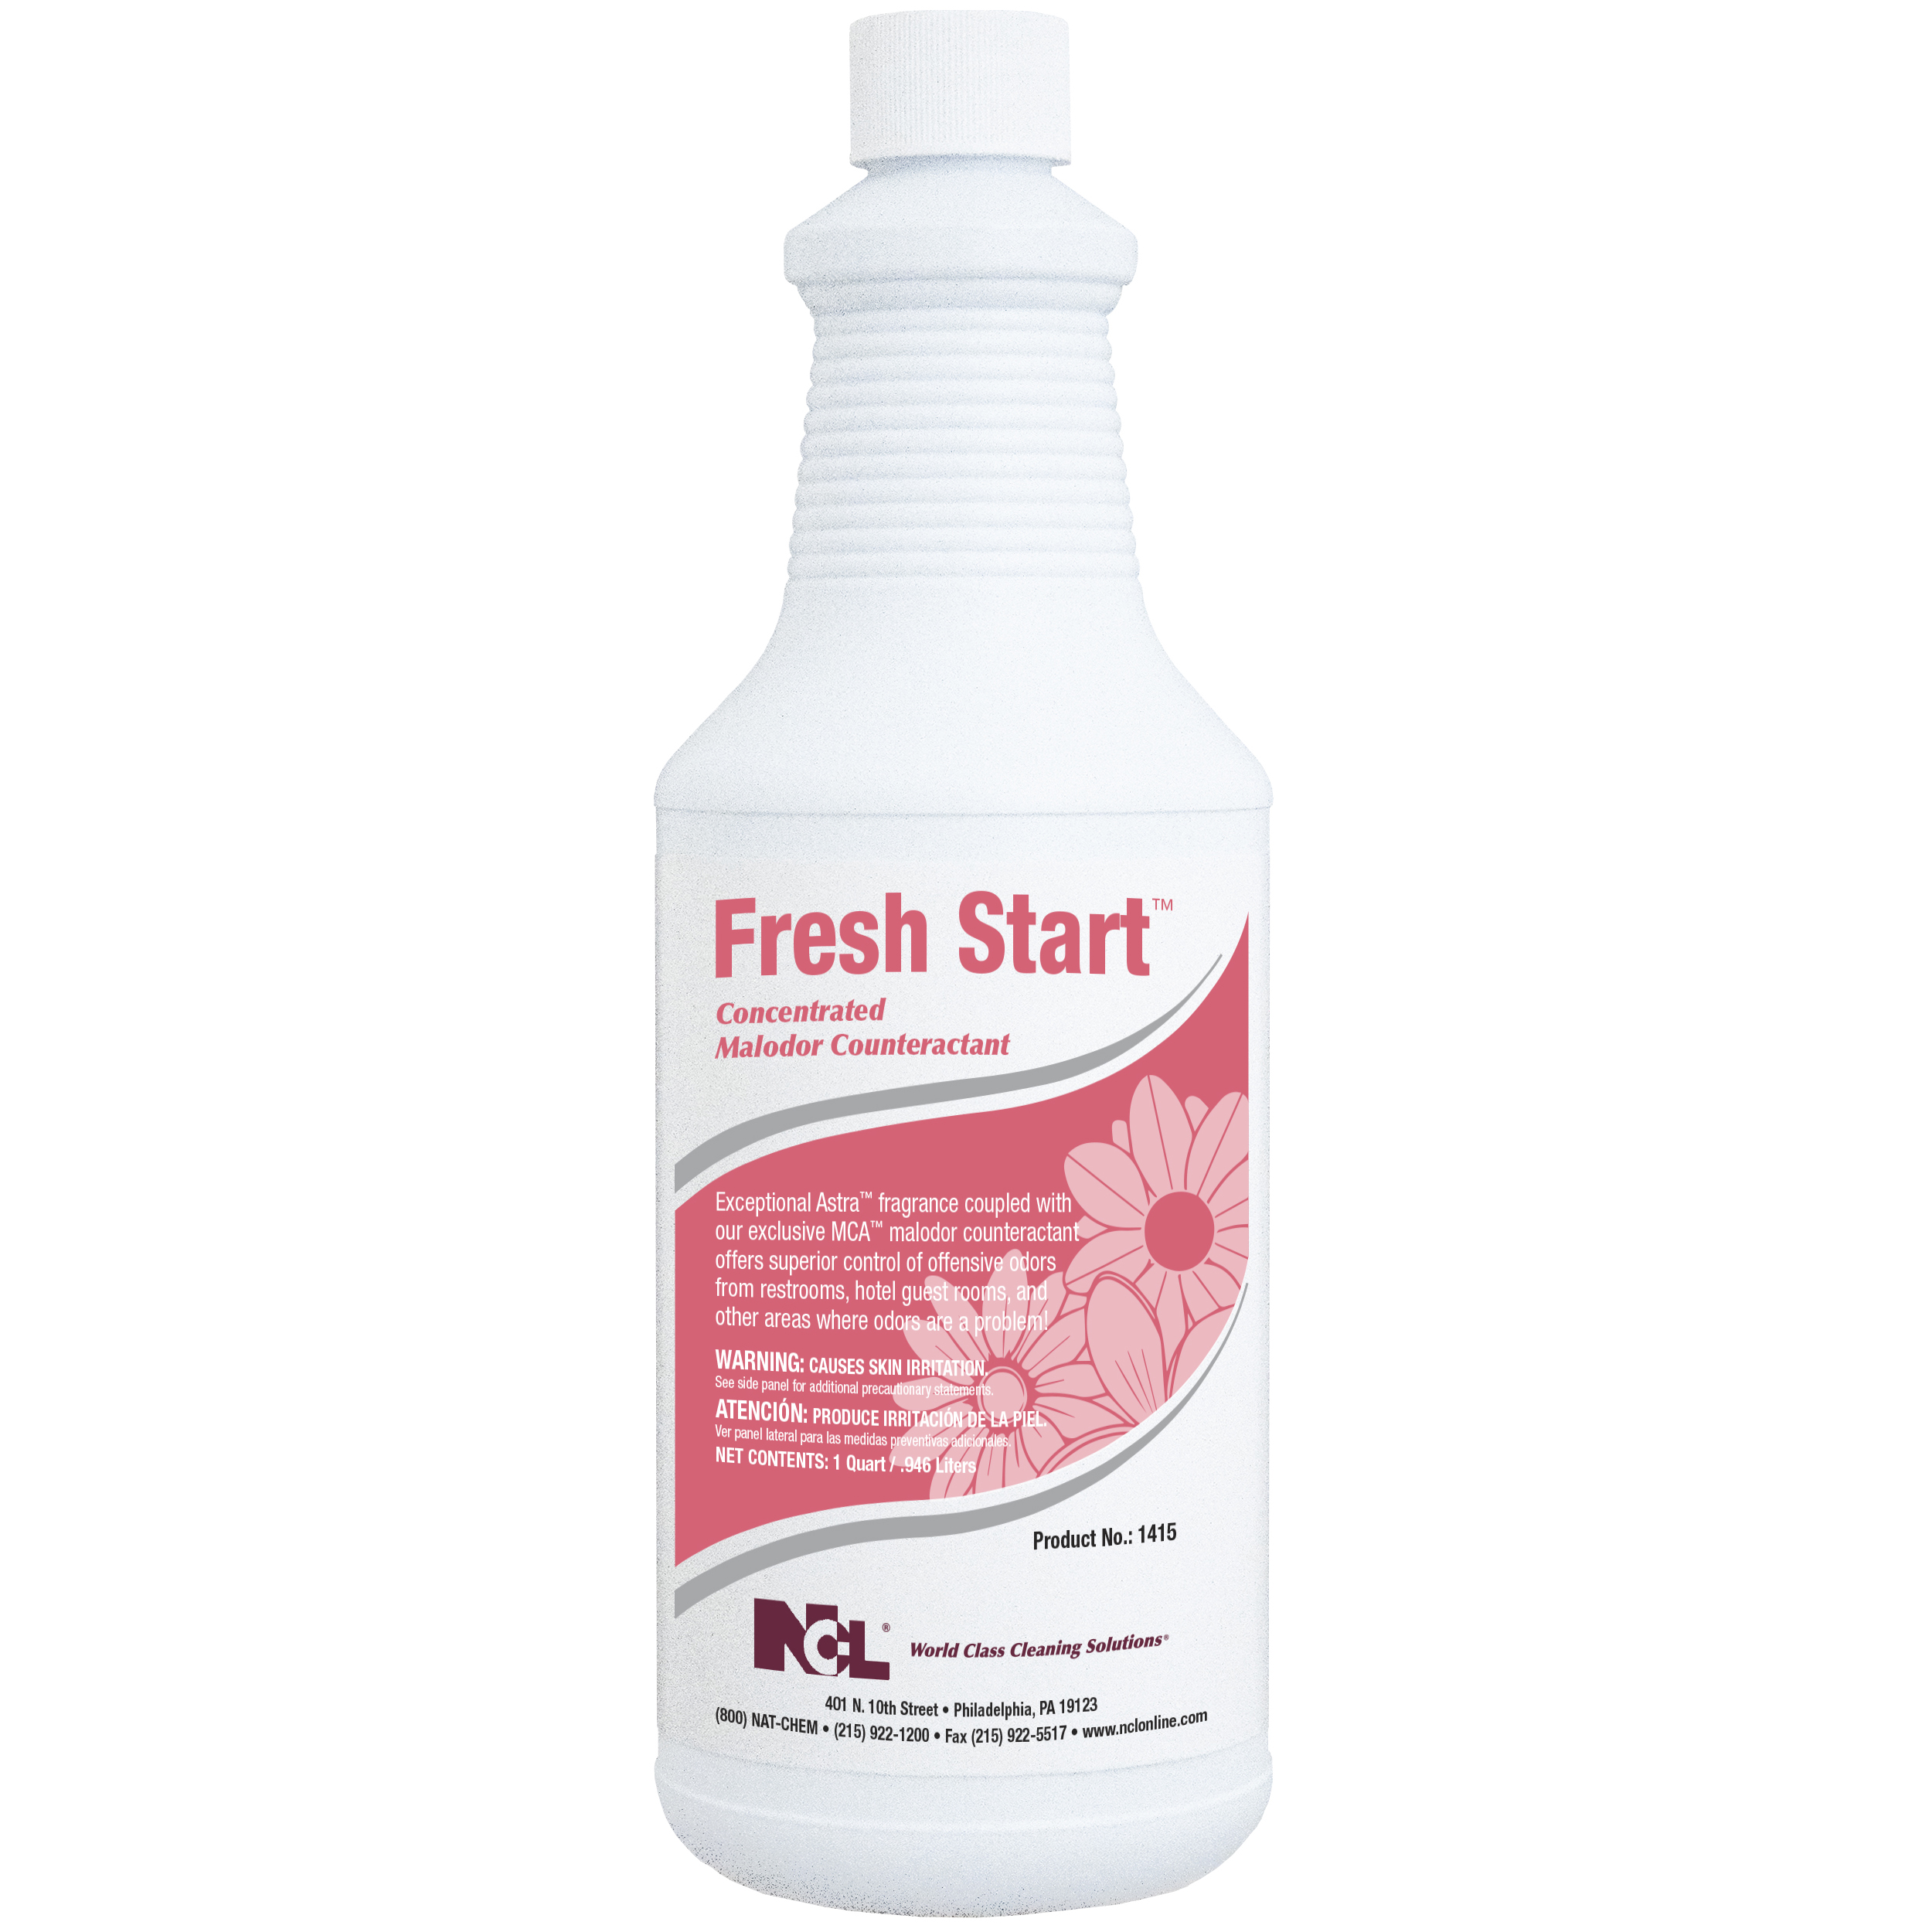  FRESH START Concentrated Malodor Counteractant 12/32 oz (1 Qt.) Case (NCL1415-36) 